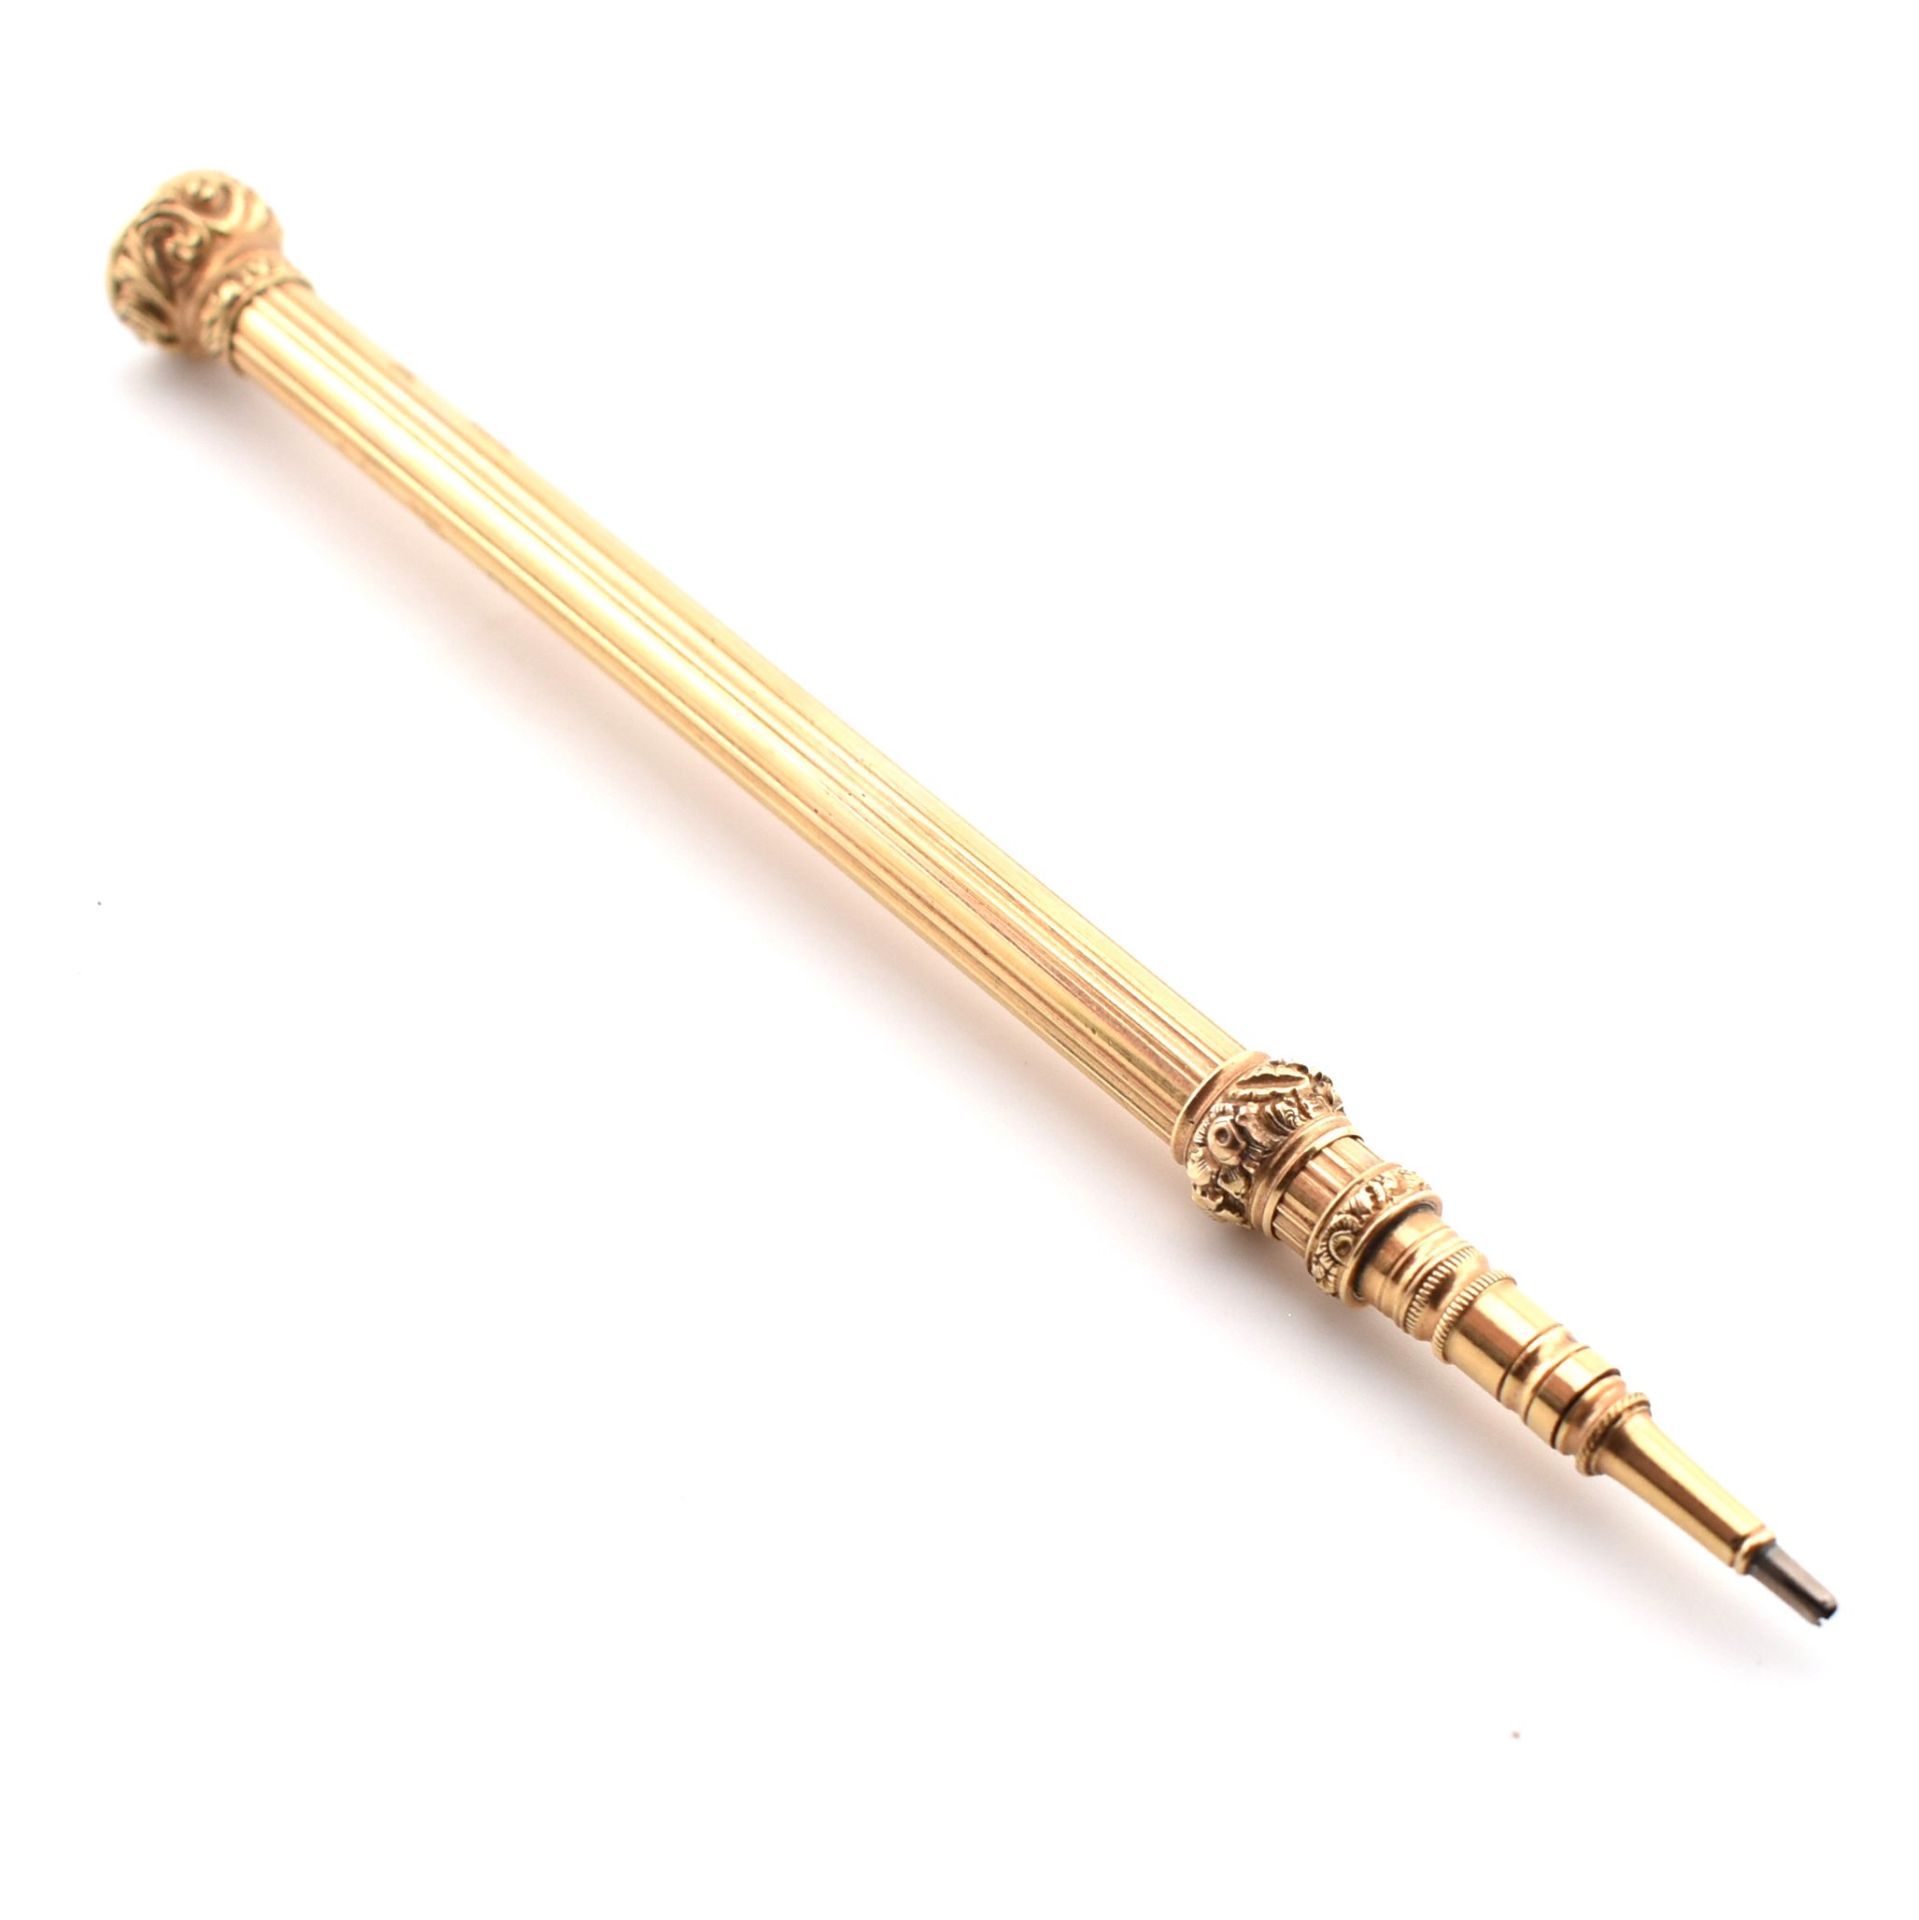 ANTIQUE GOLD & BLOODSTONE PROPELLING PENCIL